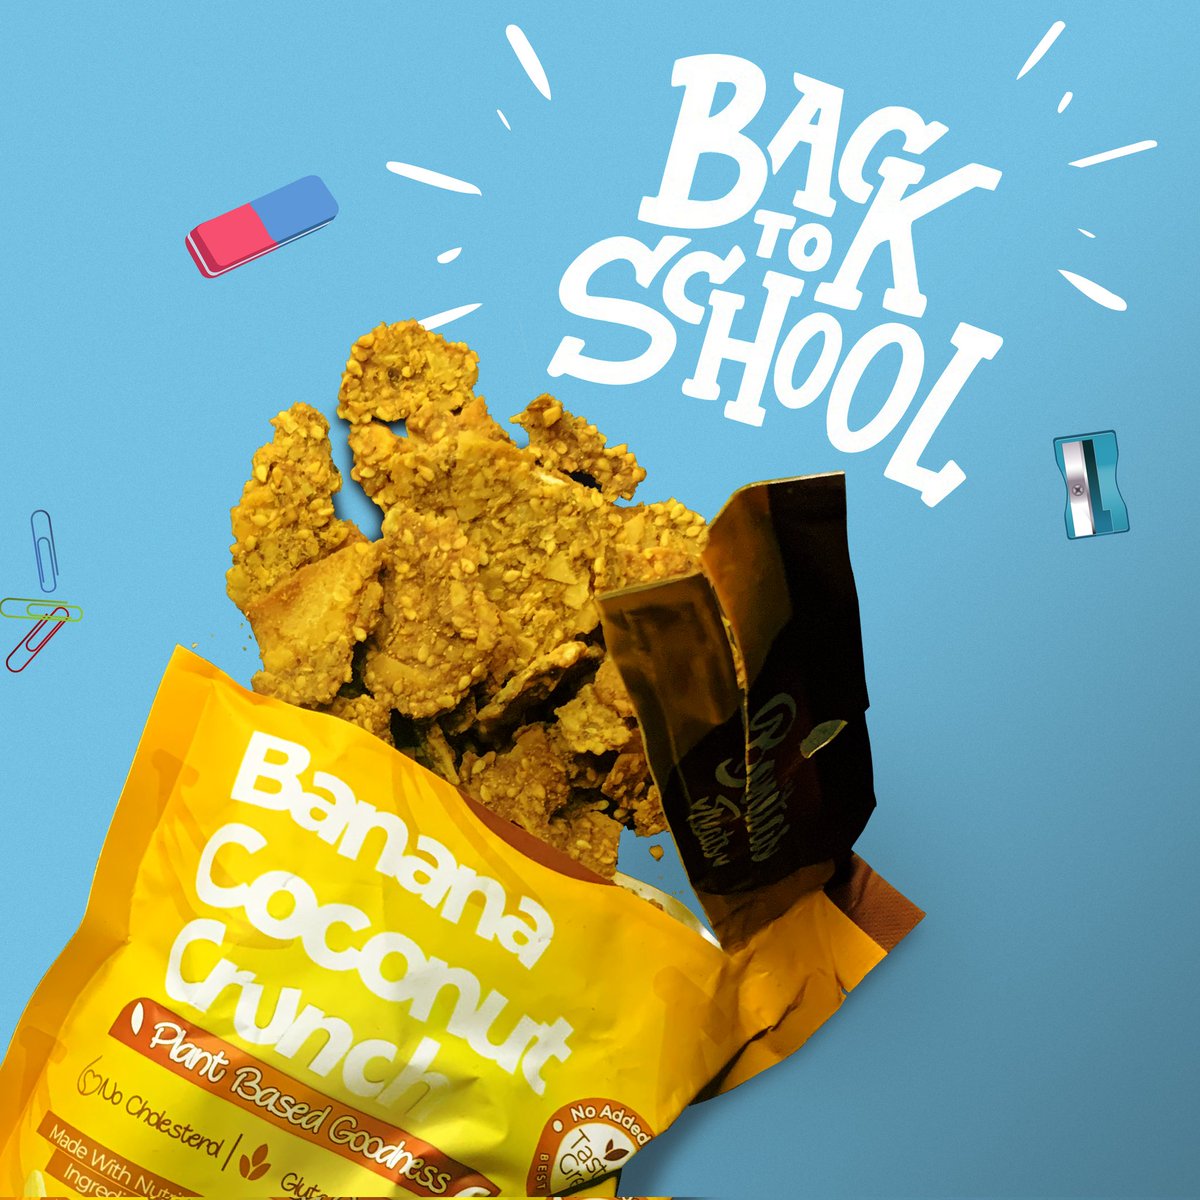 🎁 As you prepare for your children's return to school, stock up on all their Back-to-School necessities and that includes their snacks. 

.
.
#backtoschool #backtoschoolnecessities #schoolsupply #kiddiessnacks #bonitastreats #coconutchips #coconut #snacksinlagos #snacksinabuja